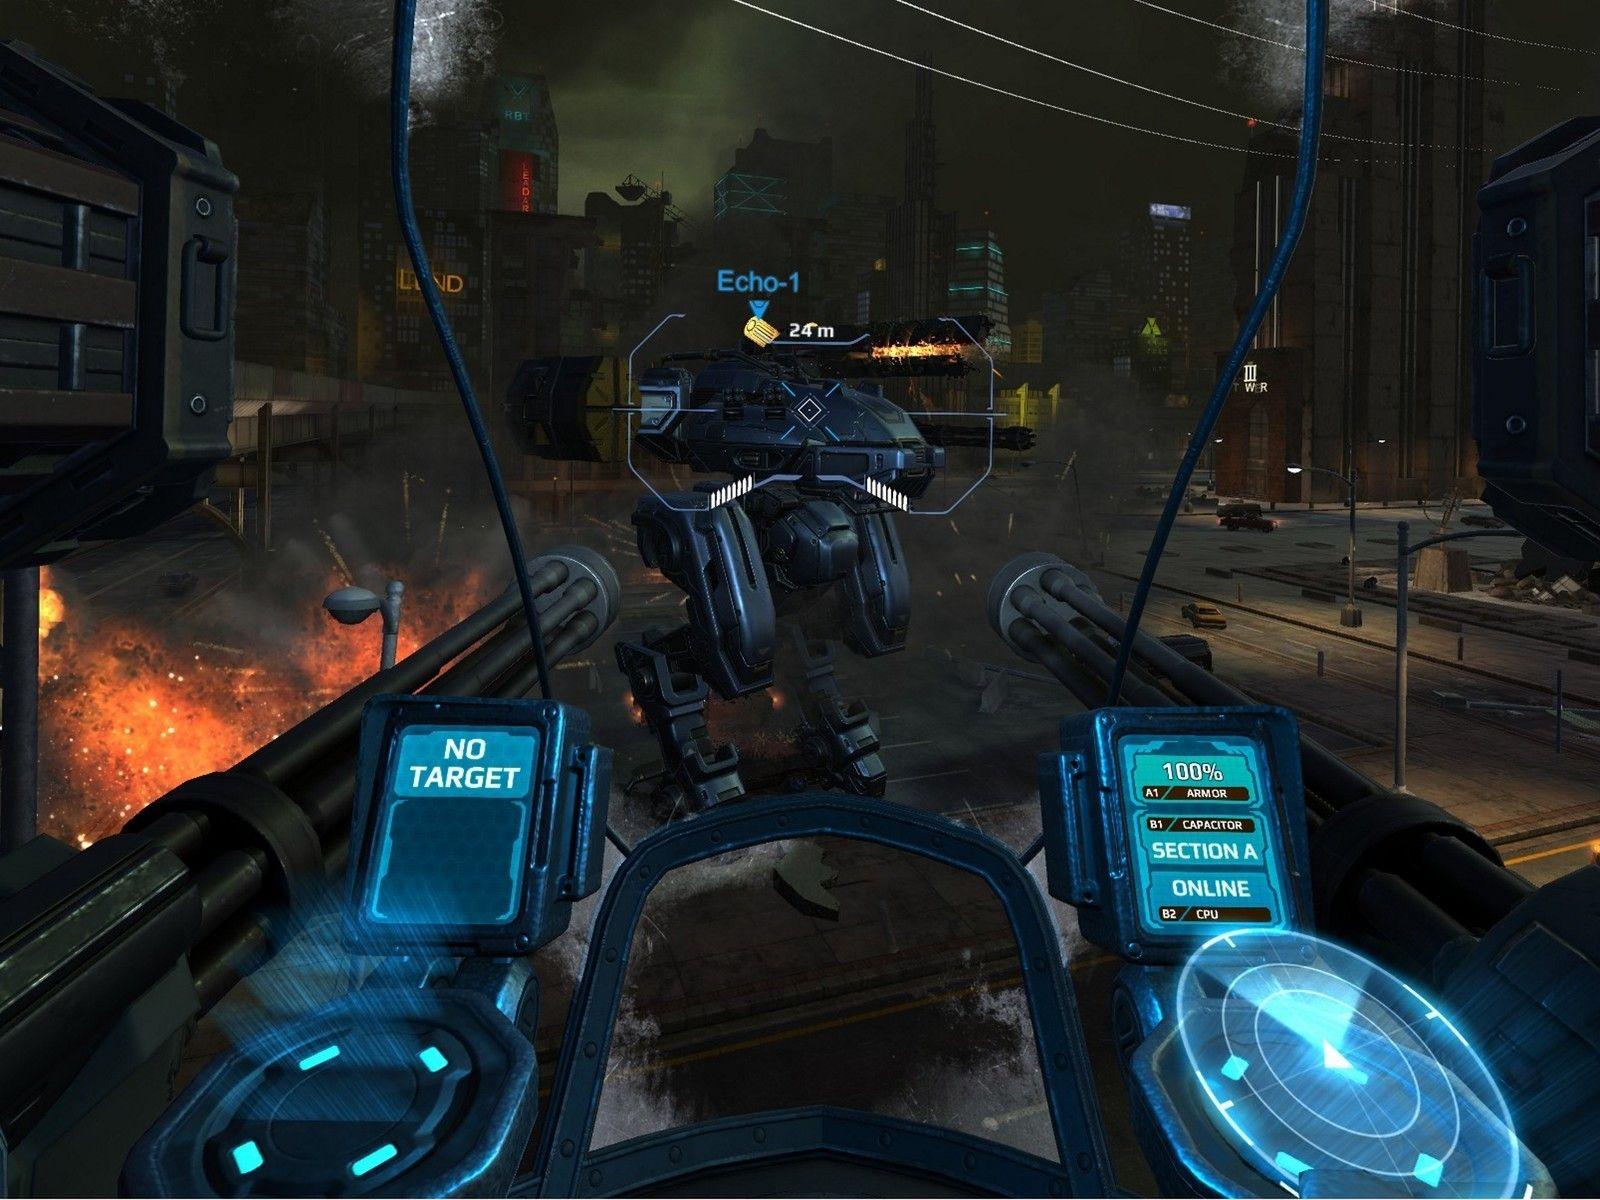 War Robots VR Review: A taste of something ridiculously fun